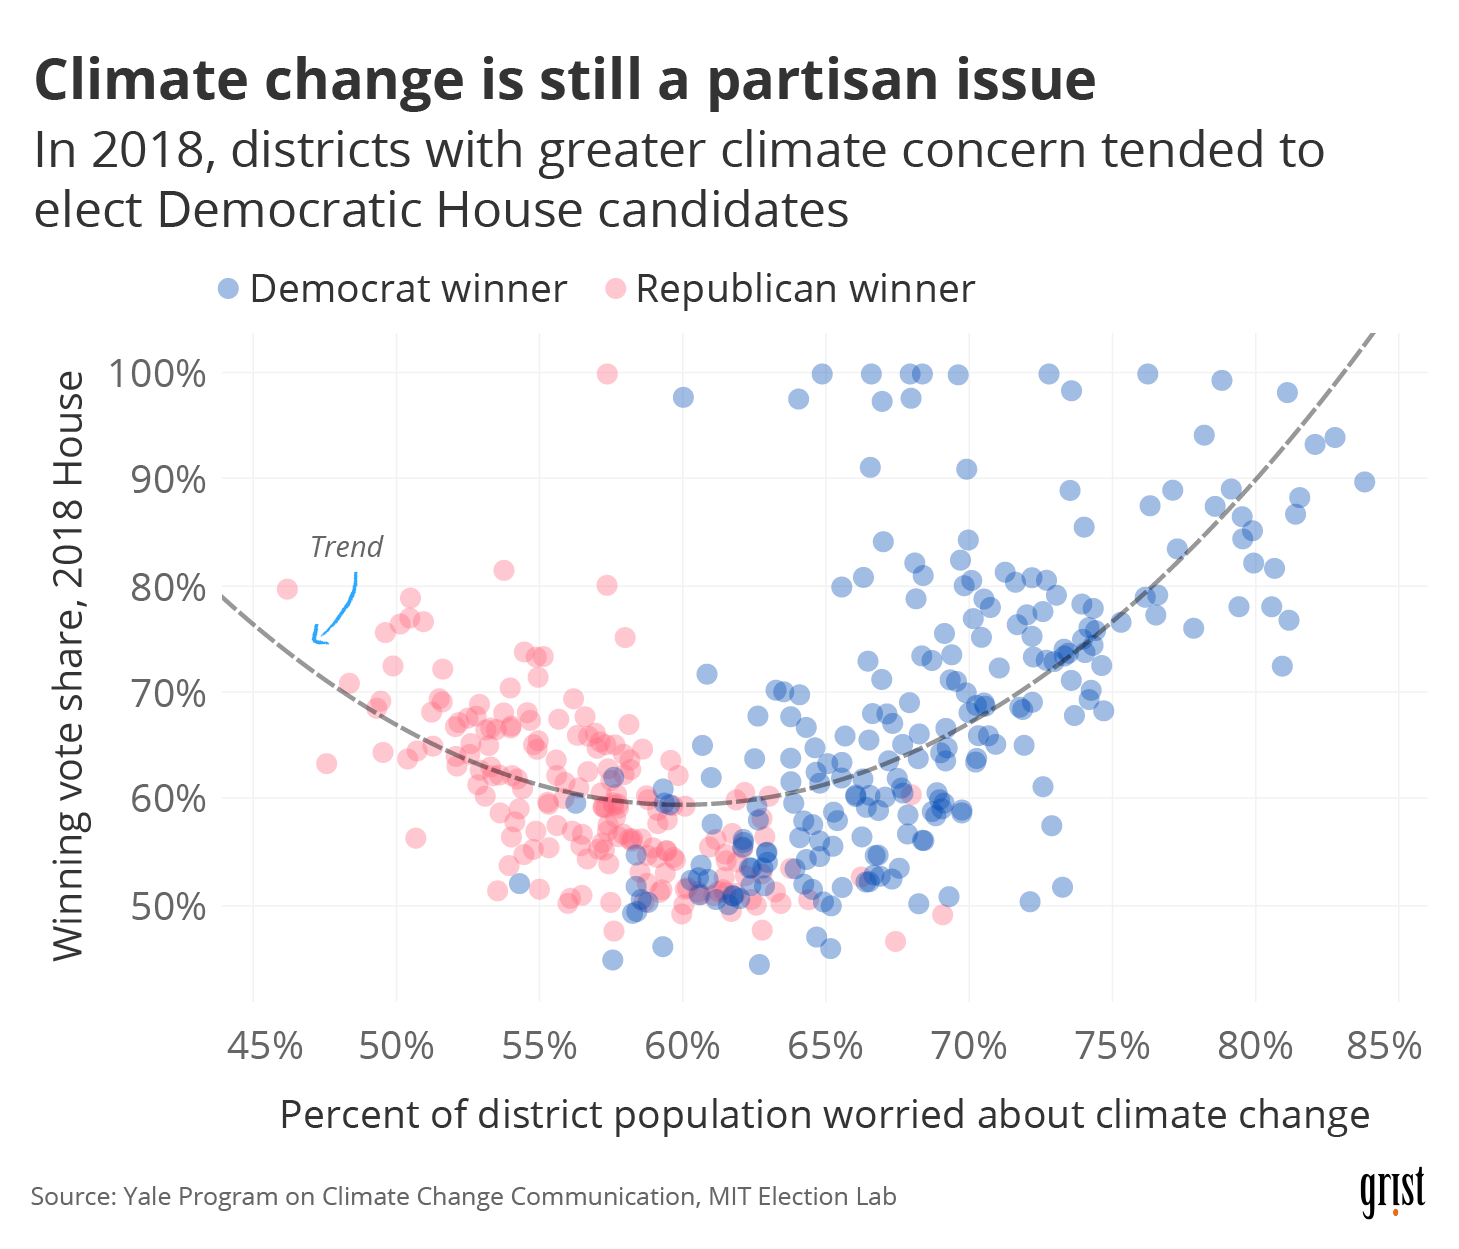 A scatter plot showing U.S. Congressional district climate concern versus 2018 House race competitiveness. The scatter plot forms a rough U-shape, with more concerned districts leaning heavily Democratic and less-concerned districts leaning heavily Republican. Toss-up districts are at the bottom of the U.